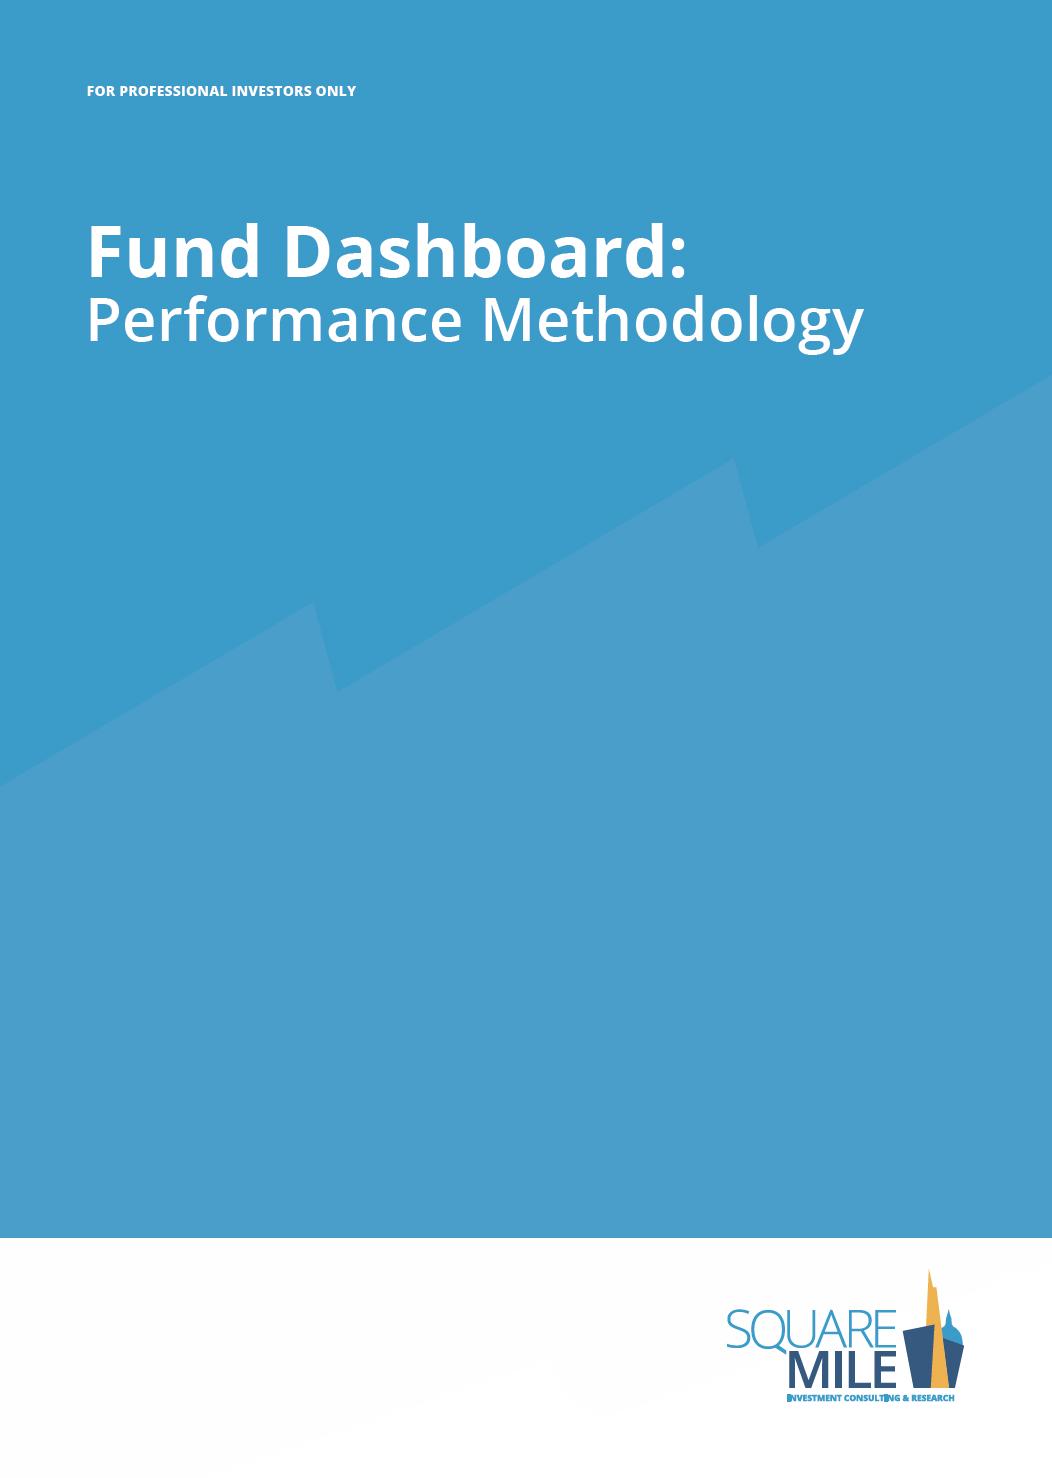 Fund-Dashboard-Performance-Methdology-Image